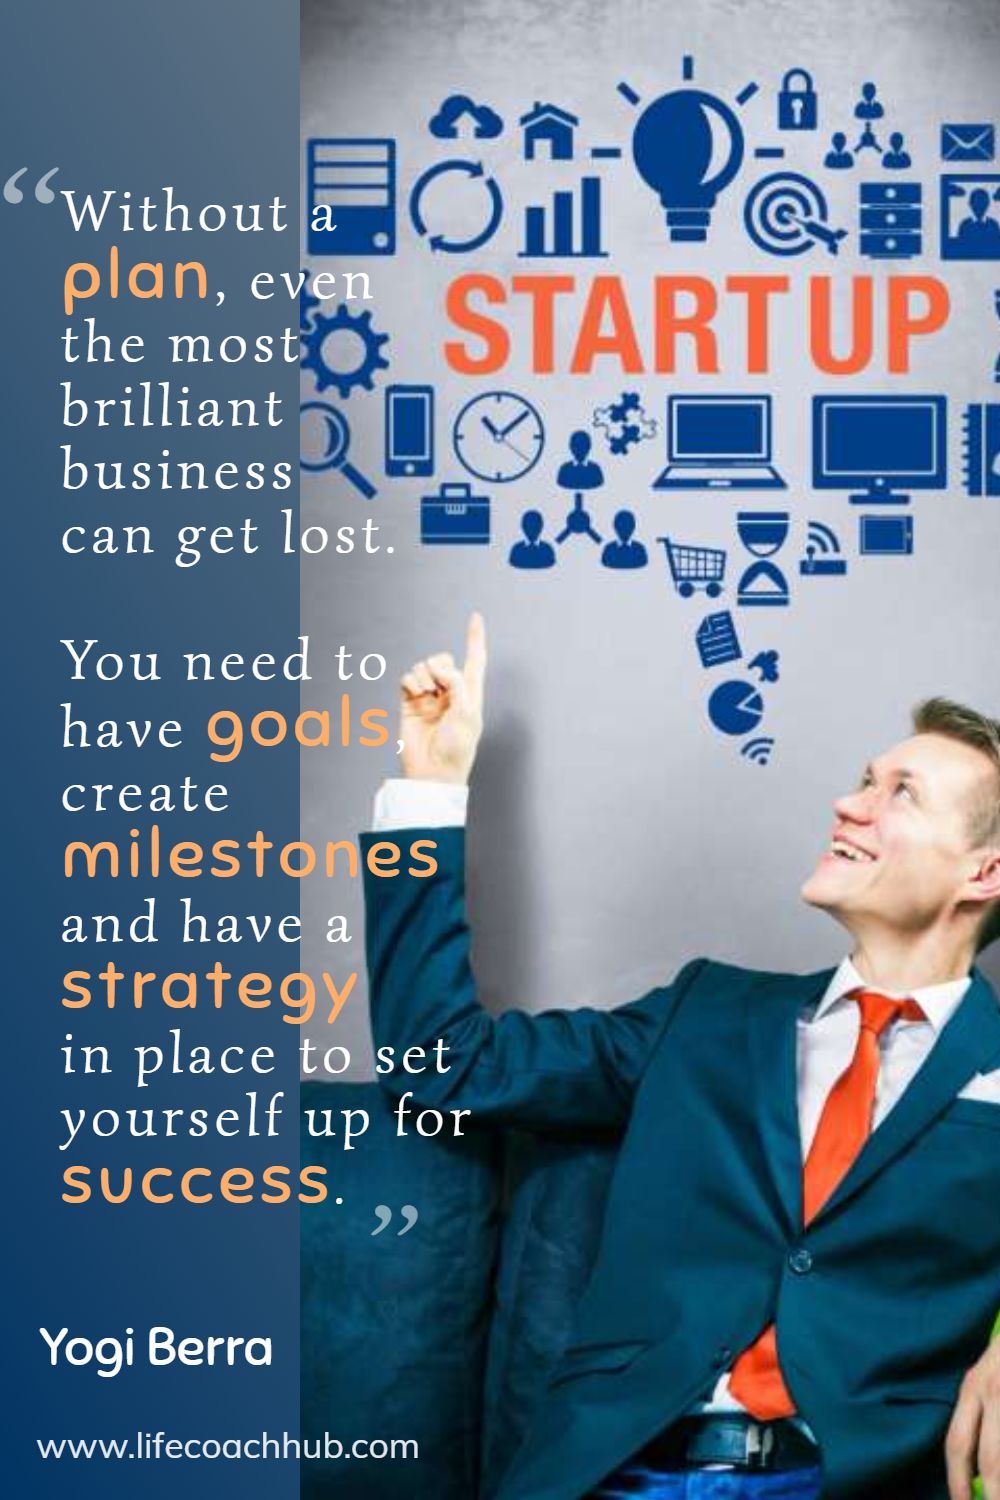 Without a plan, even the most brilliant business can get lost. You need to have goals, create milestones and have a strategy in place to set yourself up for success. Yogi Berra Coaching Quote